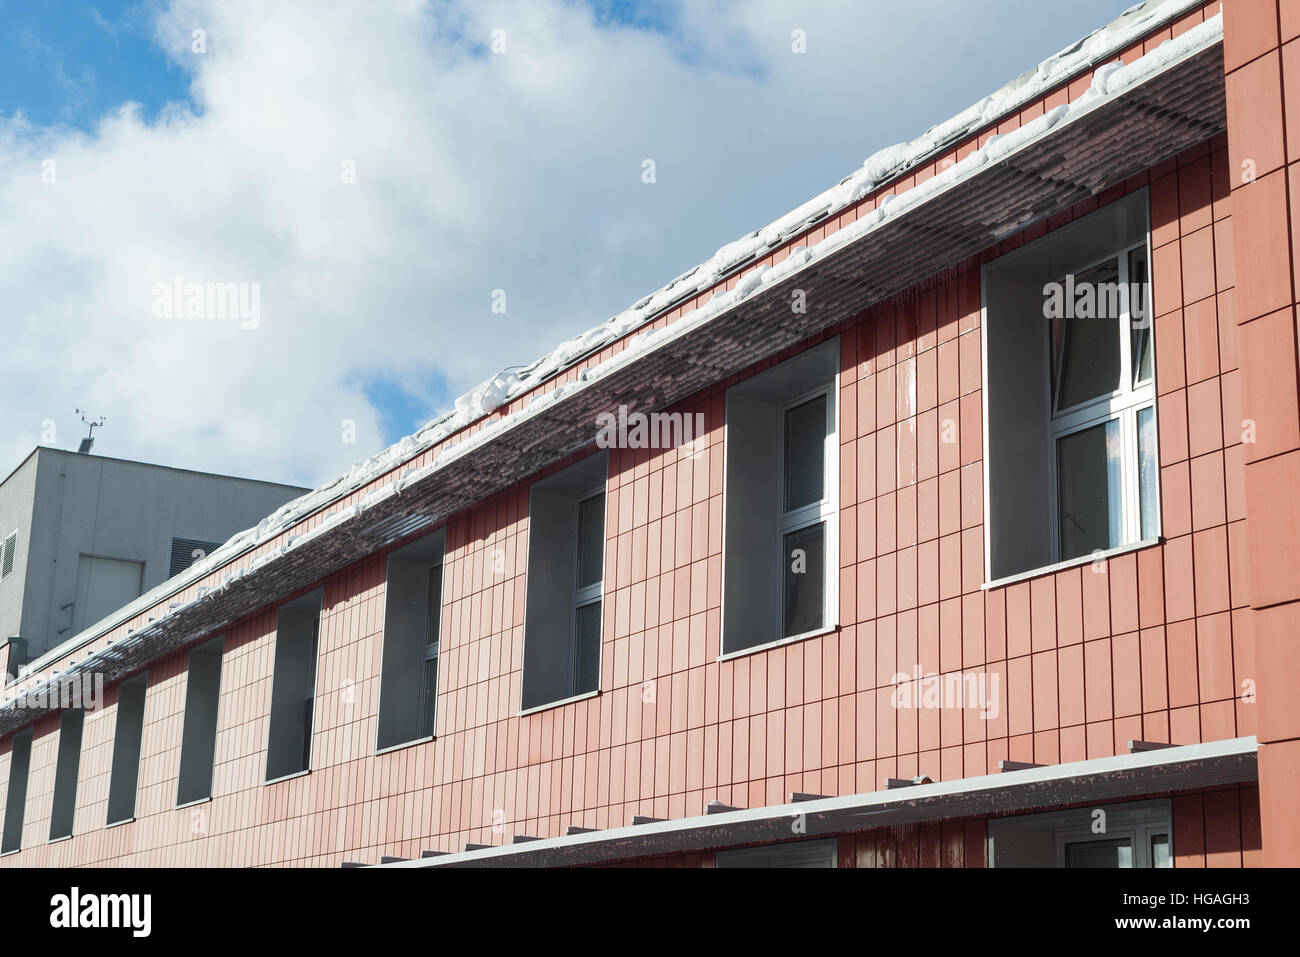 Snow on a roof - risk of falling and sliding down, caution Stock Photo